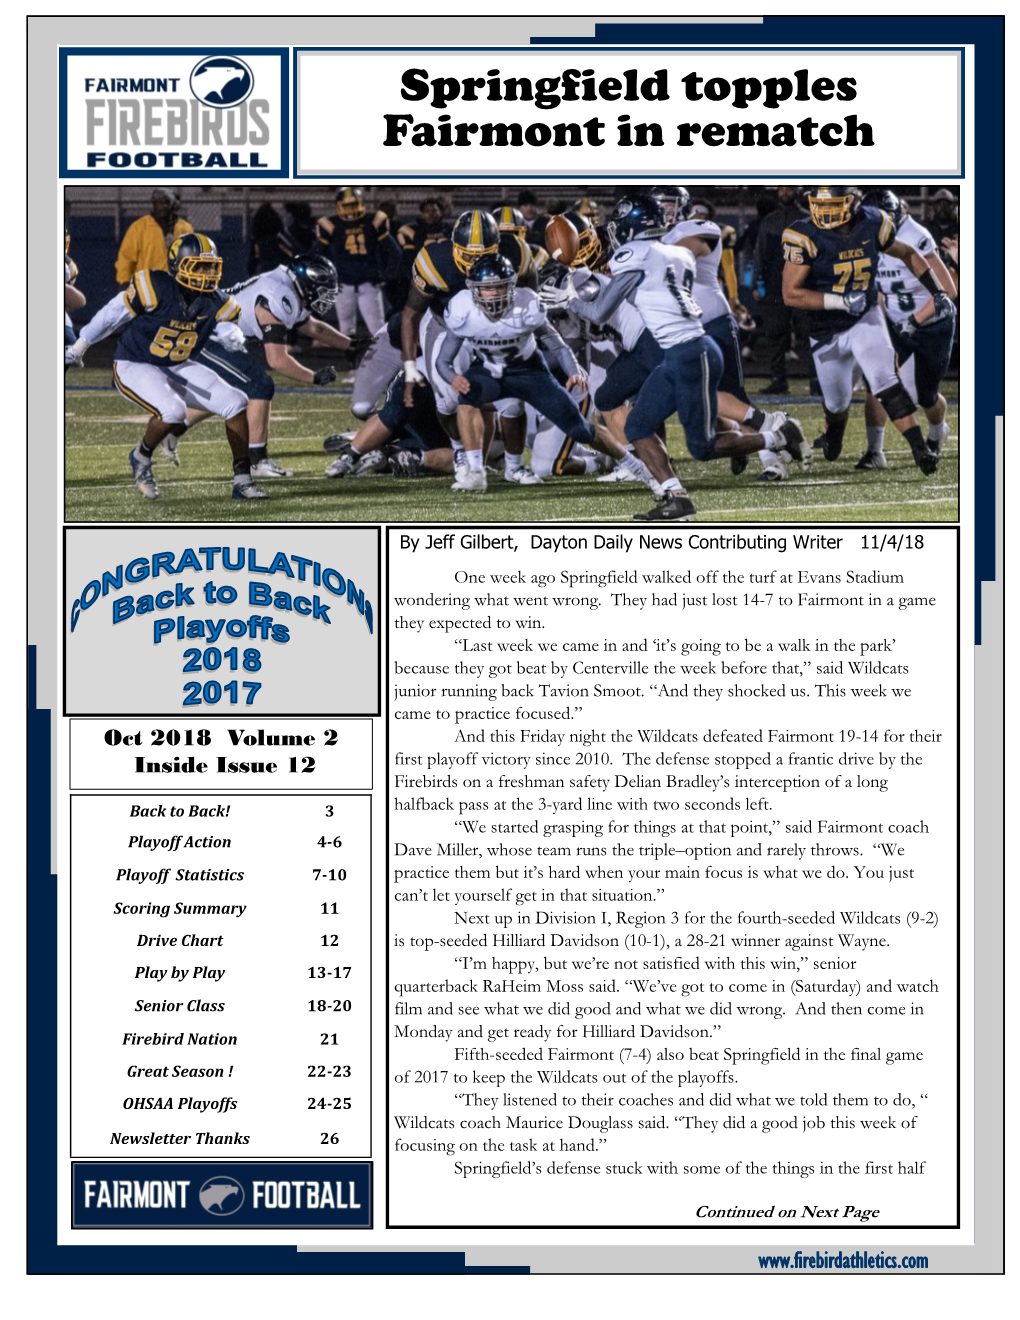 Fairmont Firebirds Football Newsletter Is Published Weekly